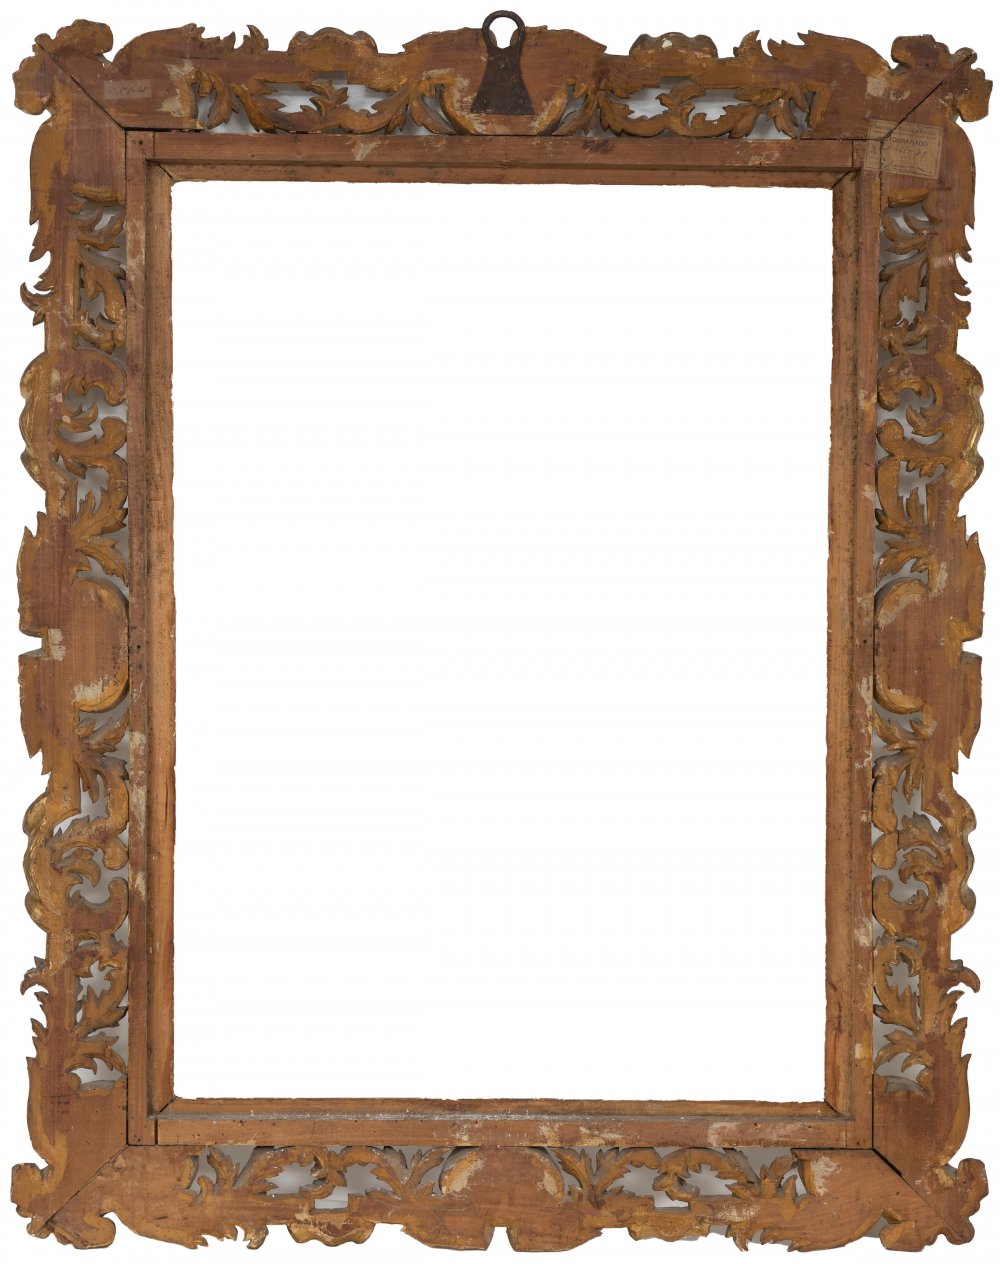 Frame; Italy, circa 1725.Carved and gilded wood.Provenance: private collection conceived from the - Image 3 of 6